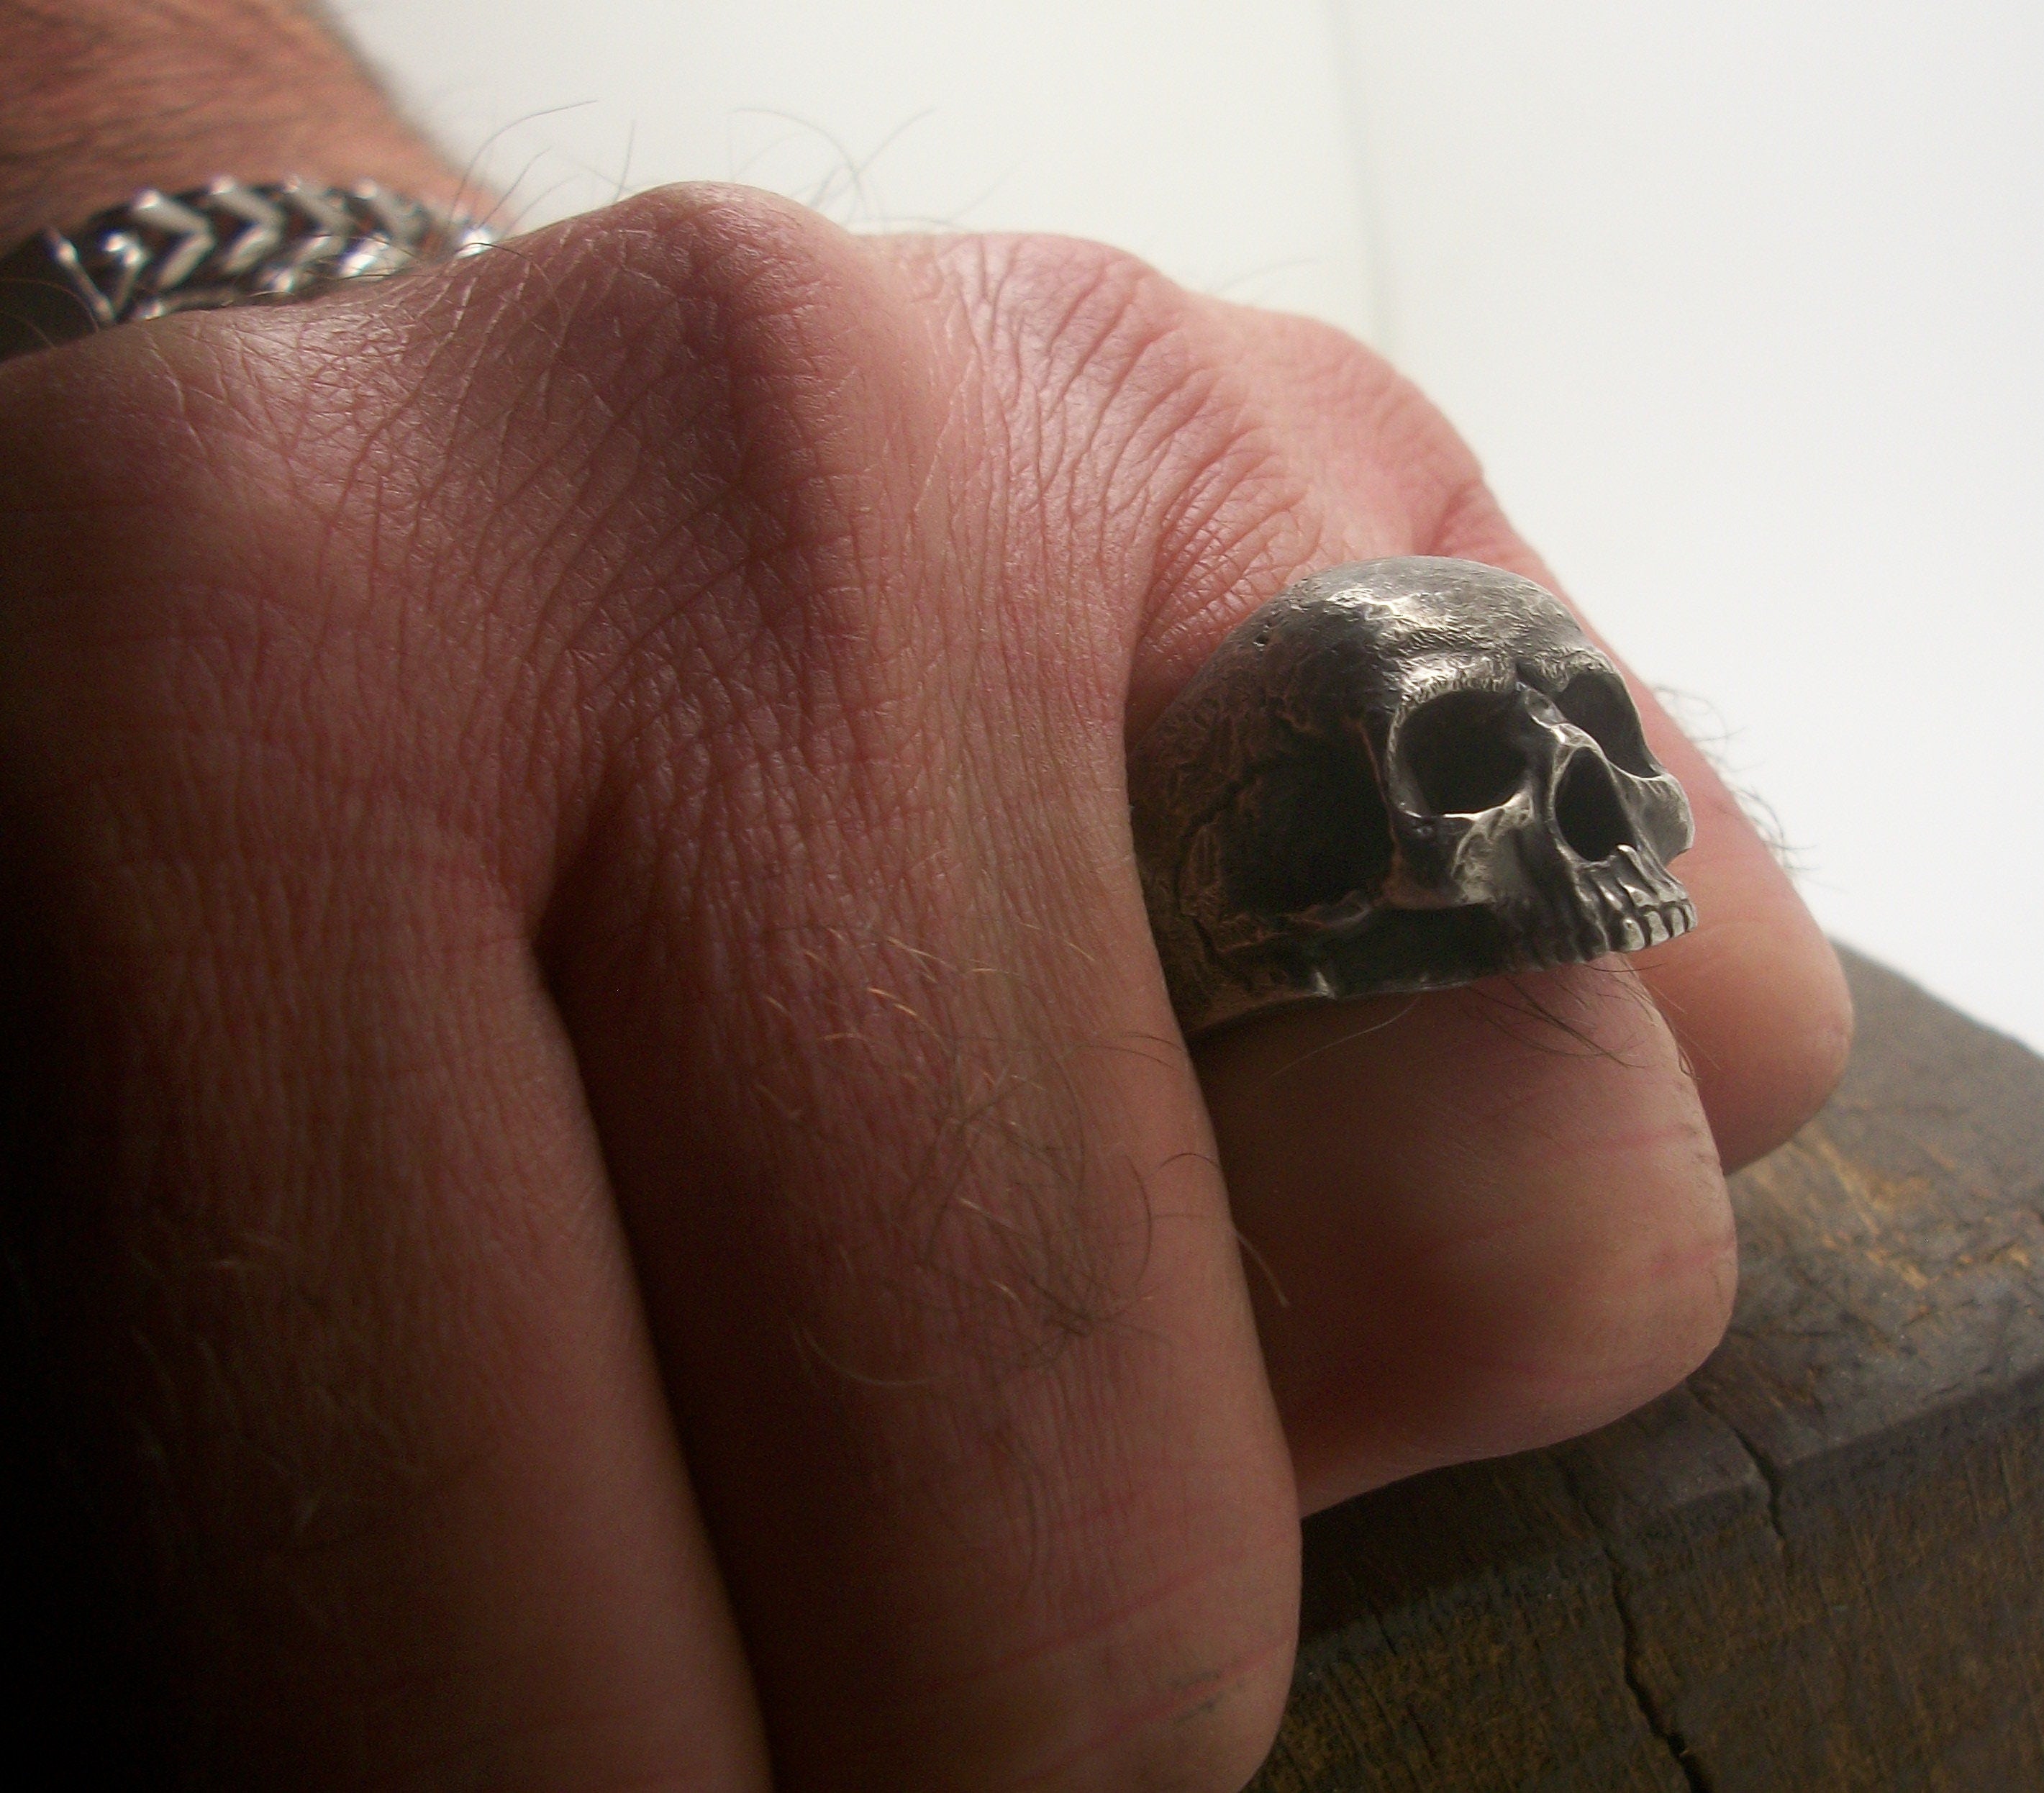 Skull ring - Sterling Silver Keith Richards Skull Ring - ALL SIZES available